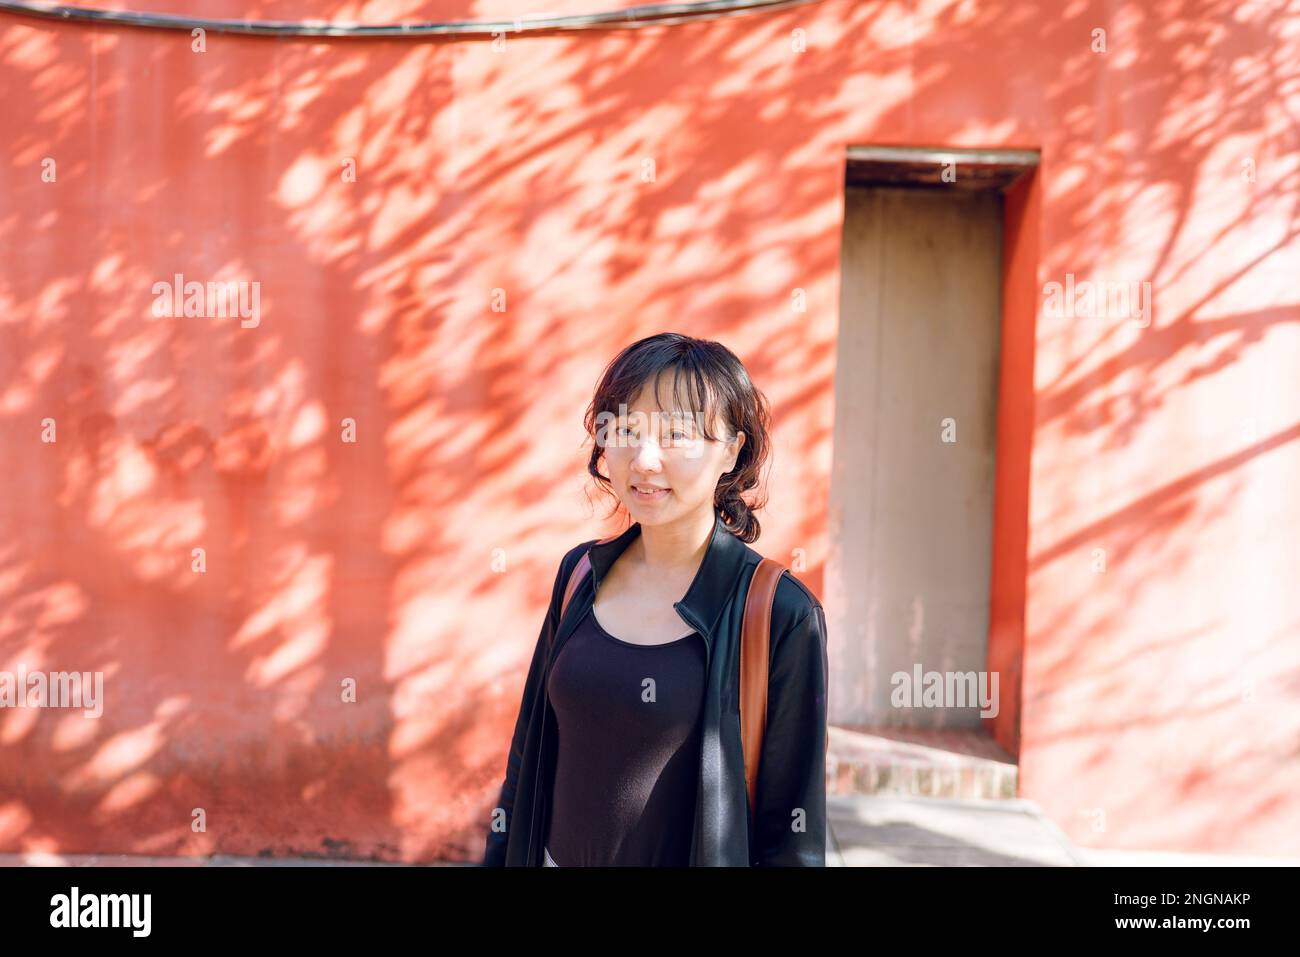 A woman standing in front of a red wall smiling at the camera. The trees shadows covered on the wall. Stock Photo